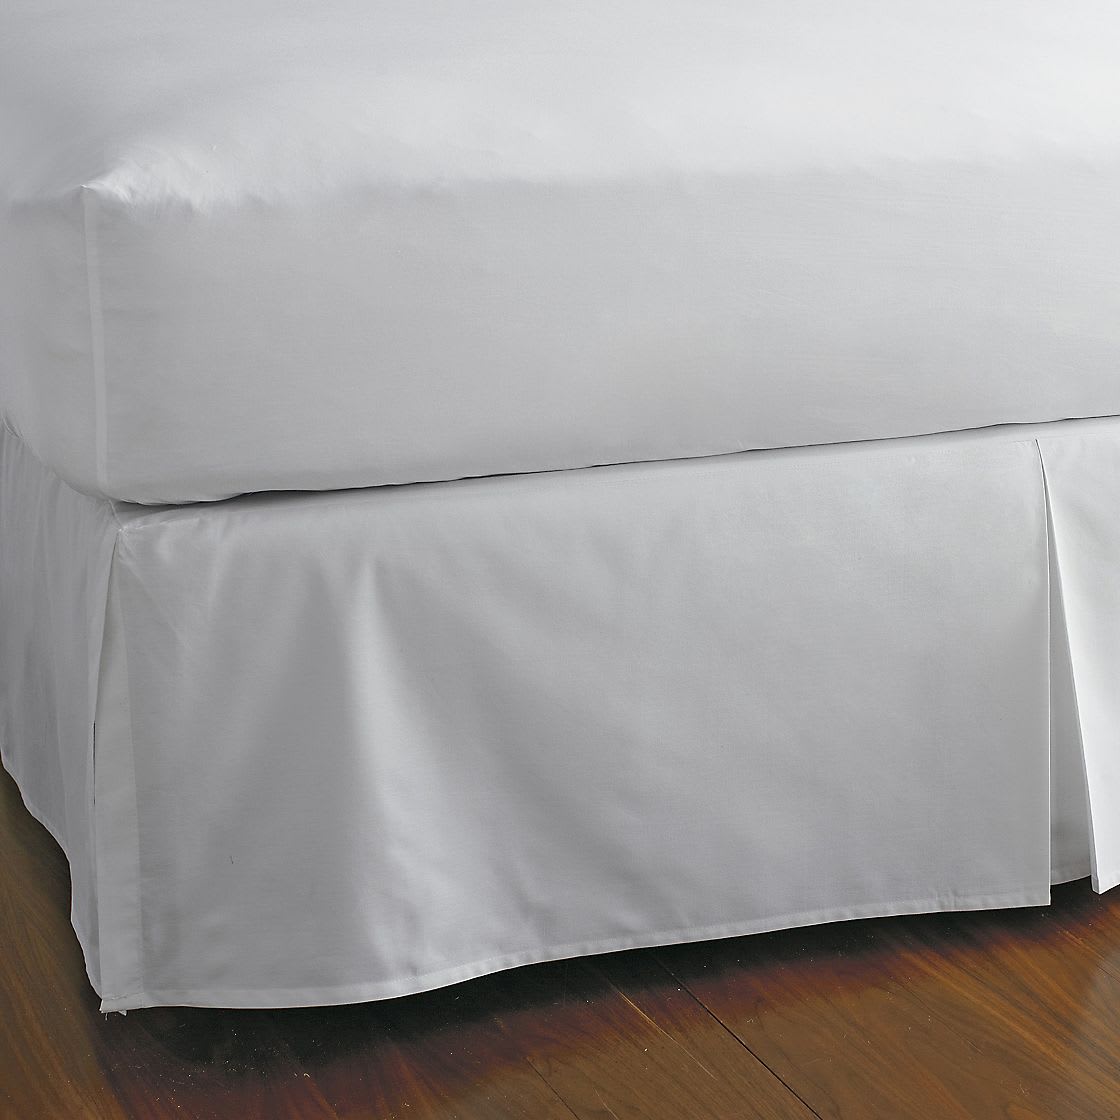 The Company Classic Percale Solid 14 Queen Bedskirt Item 782s GP72 for sale online 